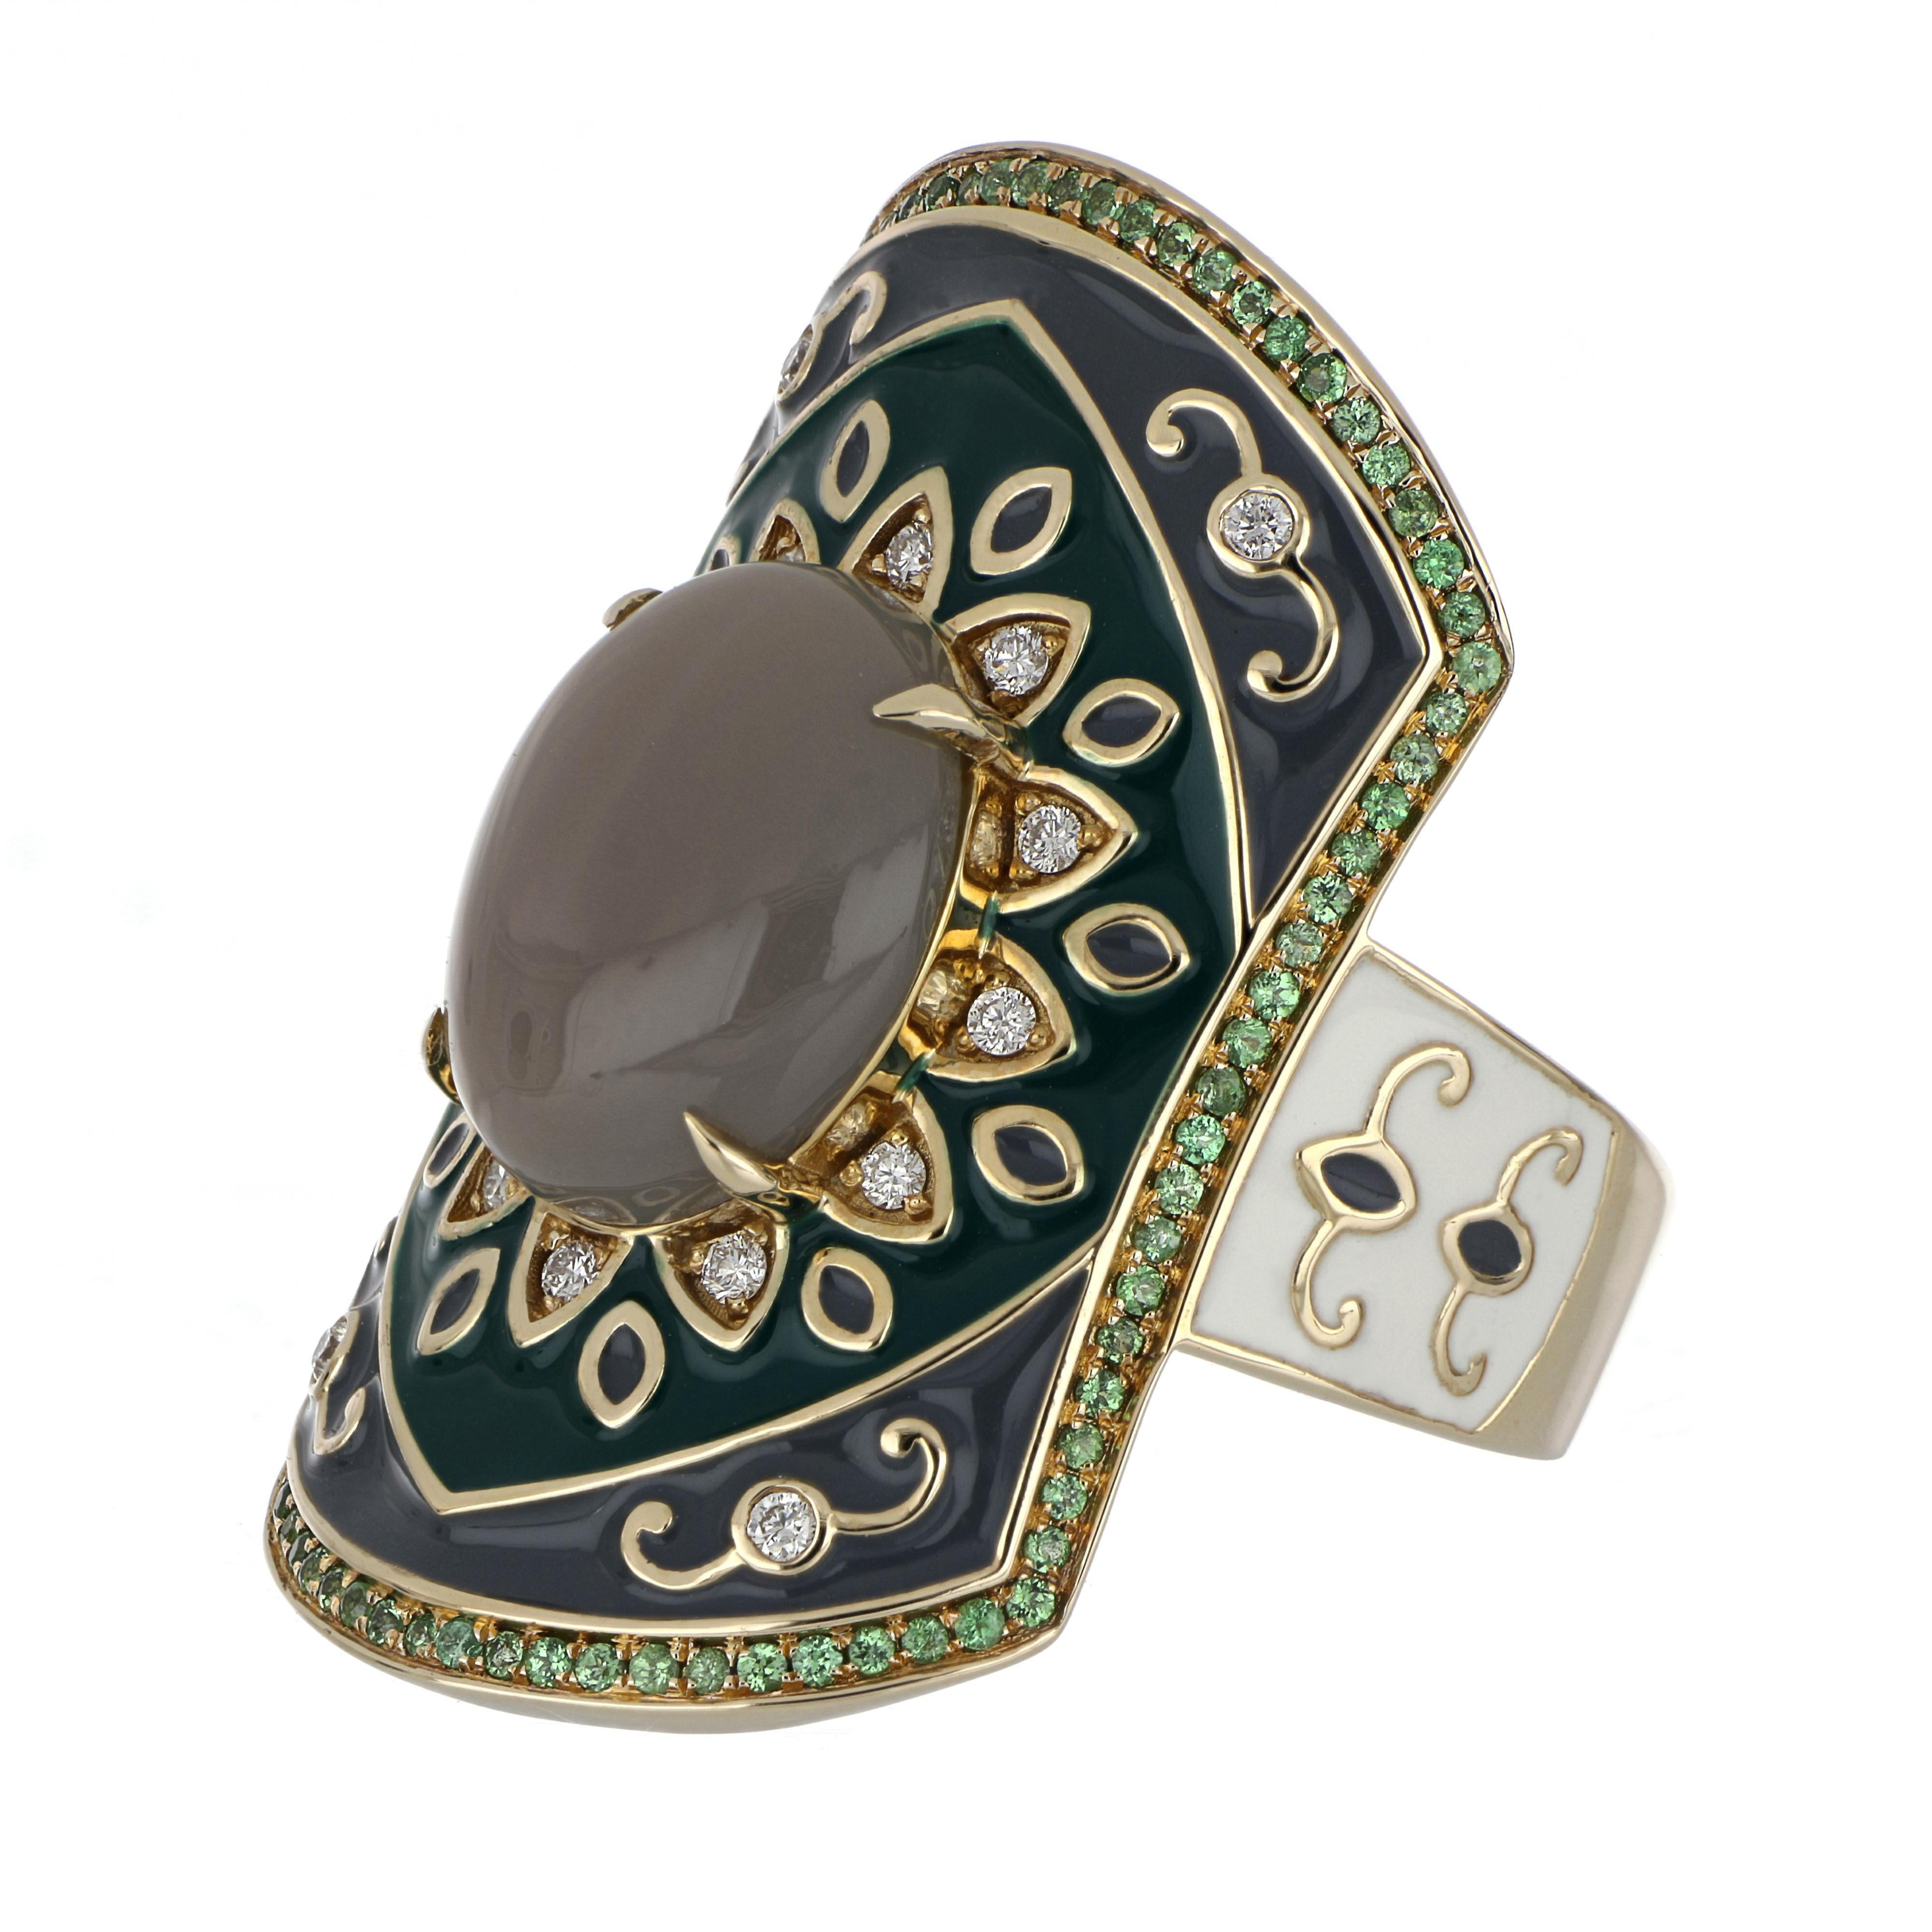 Elegant and Exquisite Enamel Cocktail 14 K Ring, center set with 4.20 Cts. Cabochon Cut Grey Chalcedony Oval . Surrounded with Diamonds, weighing approx. 0.15 cts. And accented with 0.34 Cts Tsavorite Beautifully Hand crafted in 14 Karat Yellow